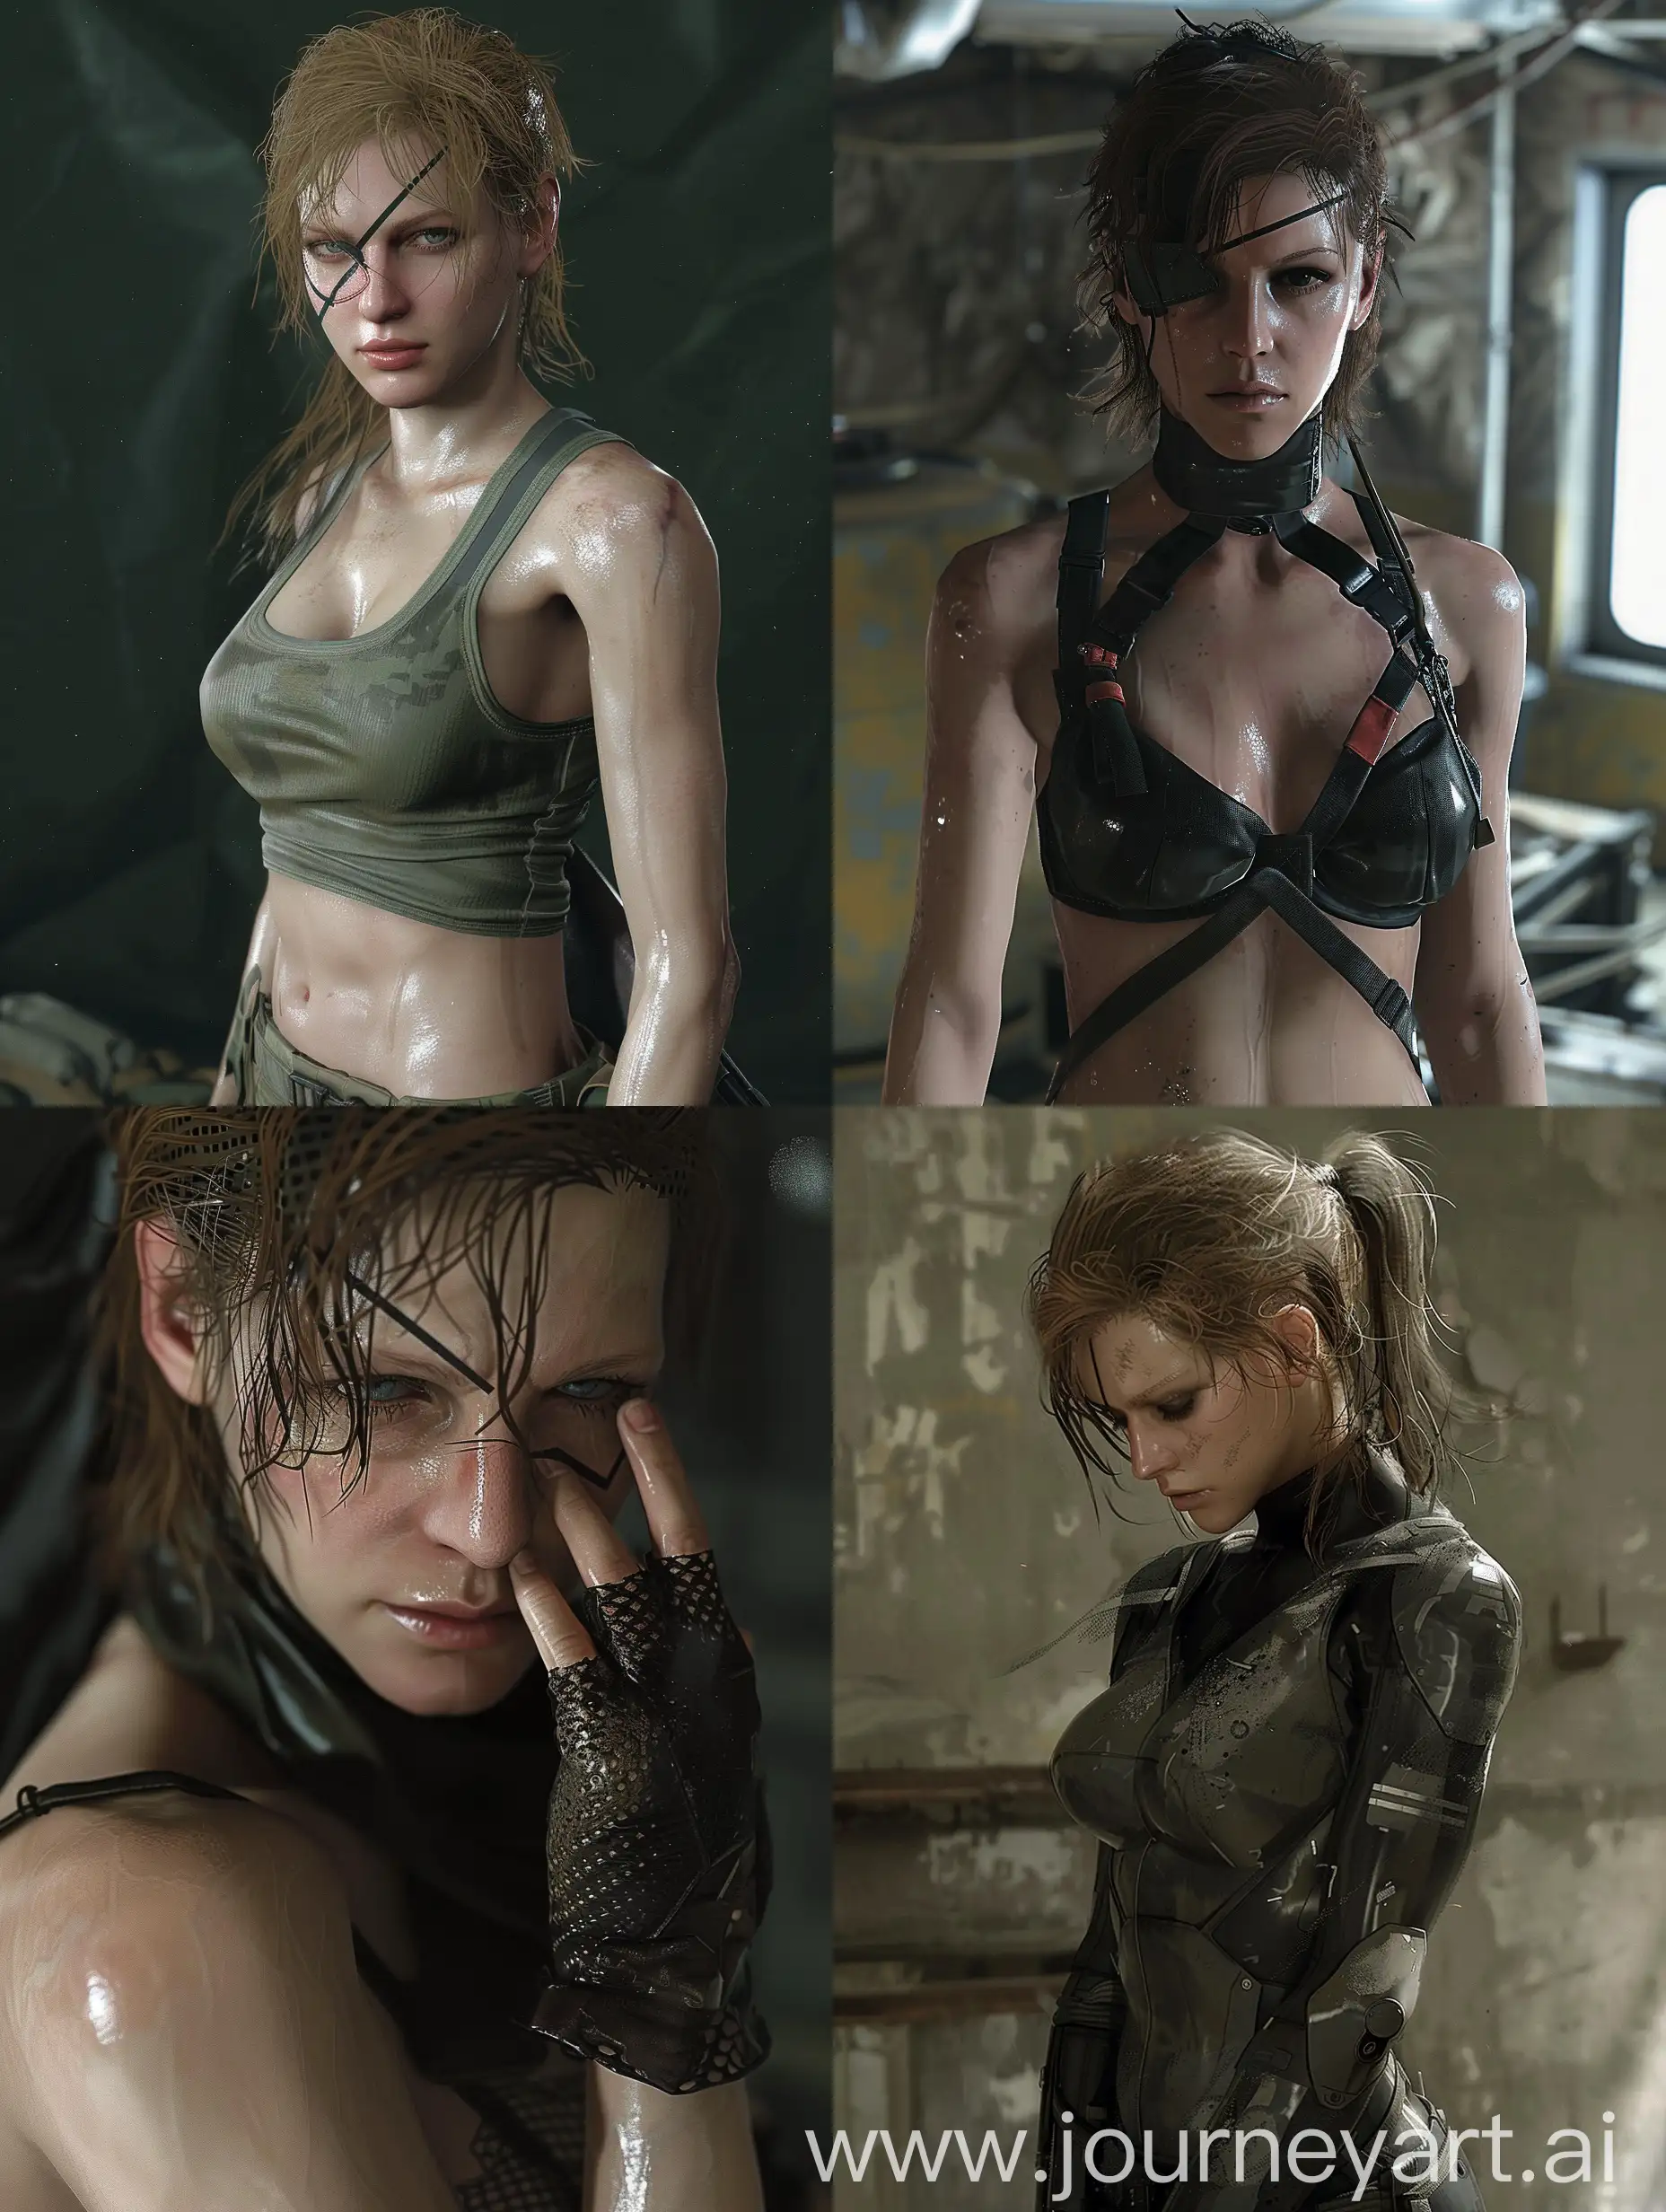 Mysterious-Female-Character-from-Metal-Gear-Solid-5-The-Phantom-Pain